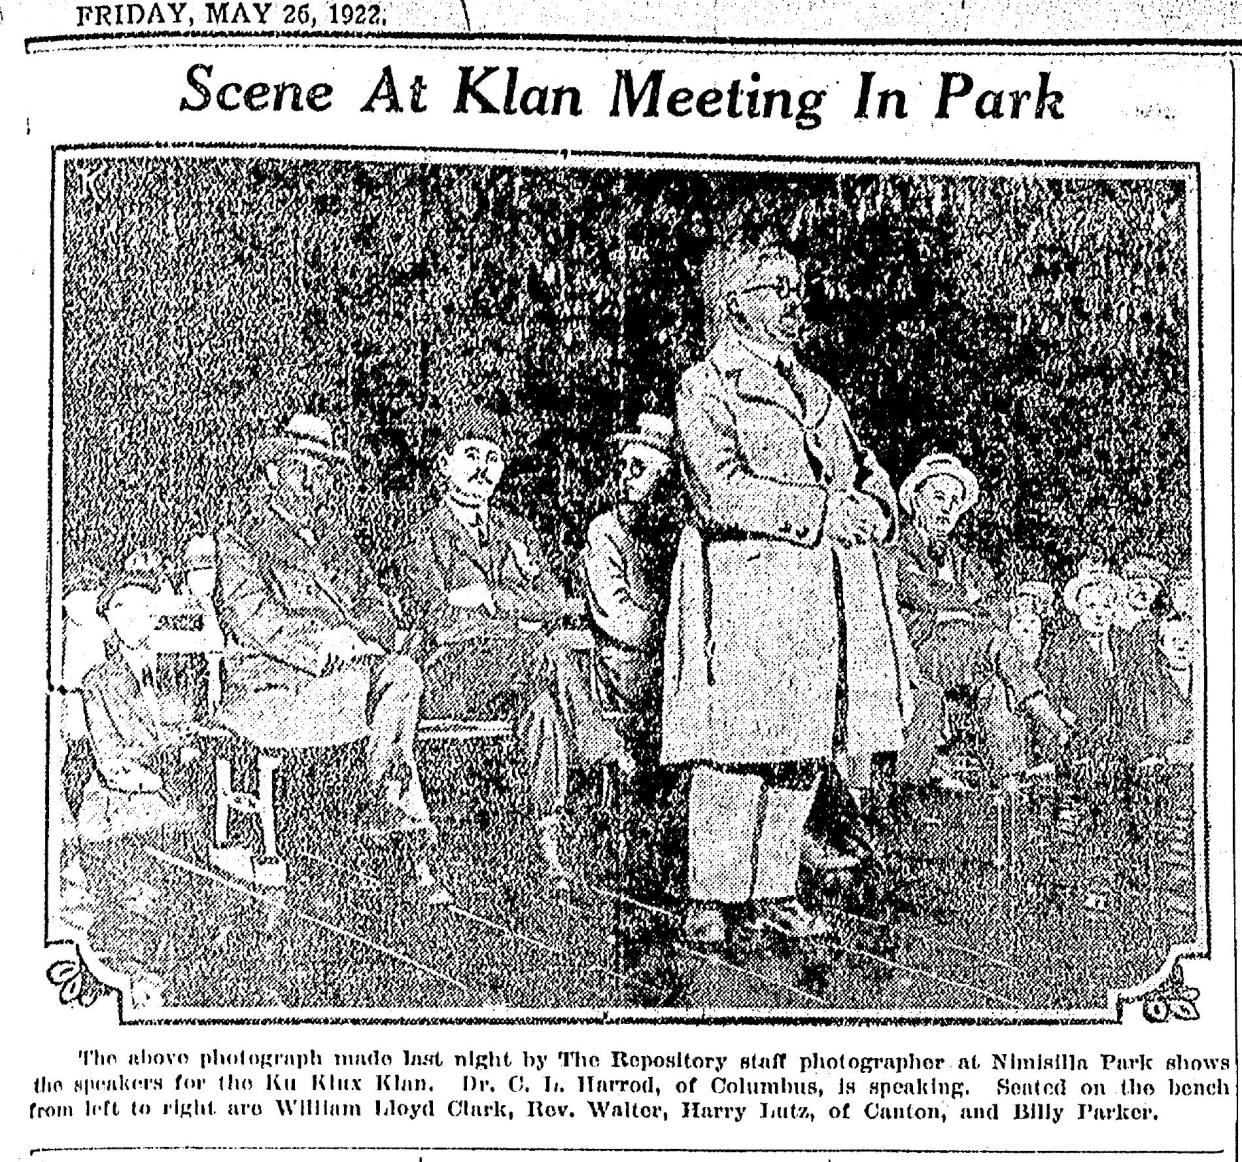 A photo from the May 26, 1922, edition of The Canton Repository shows a gathering of the Ku Klux Klan in Nimisilla Park in Canton. The meeting was the subject of much protest, and had been scaled back by the group after concerns.